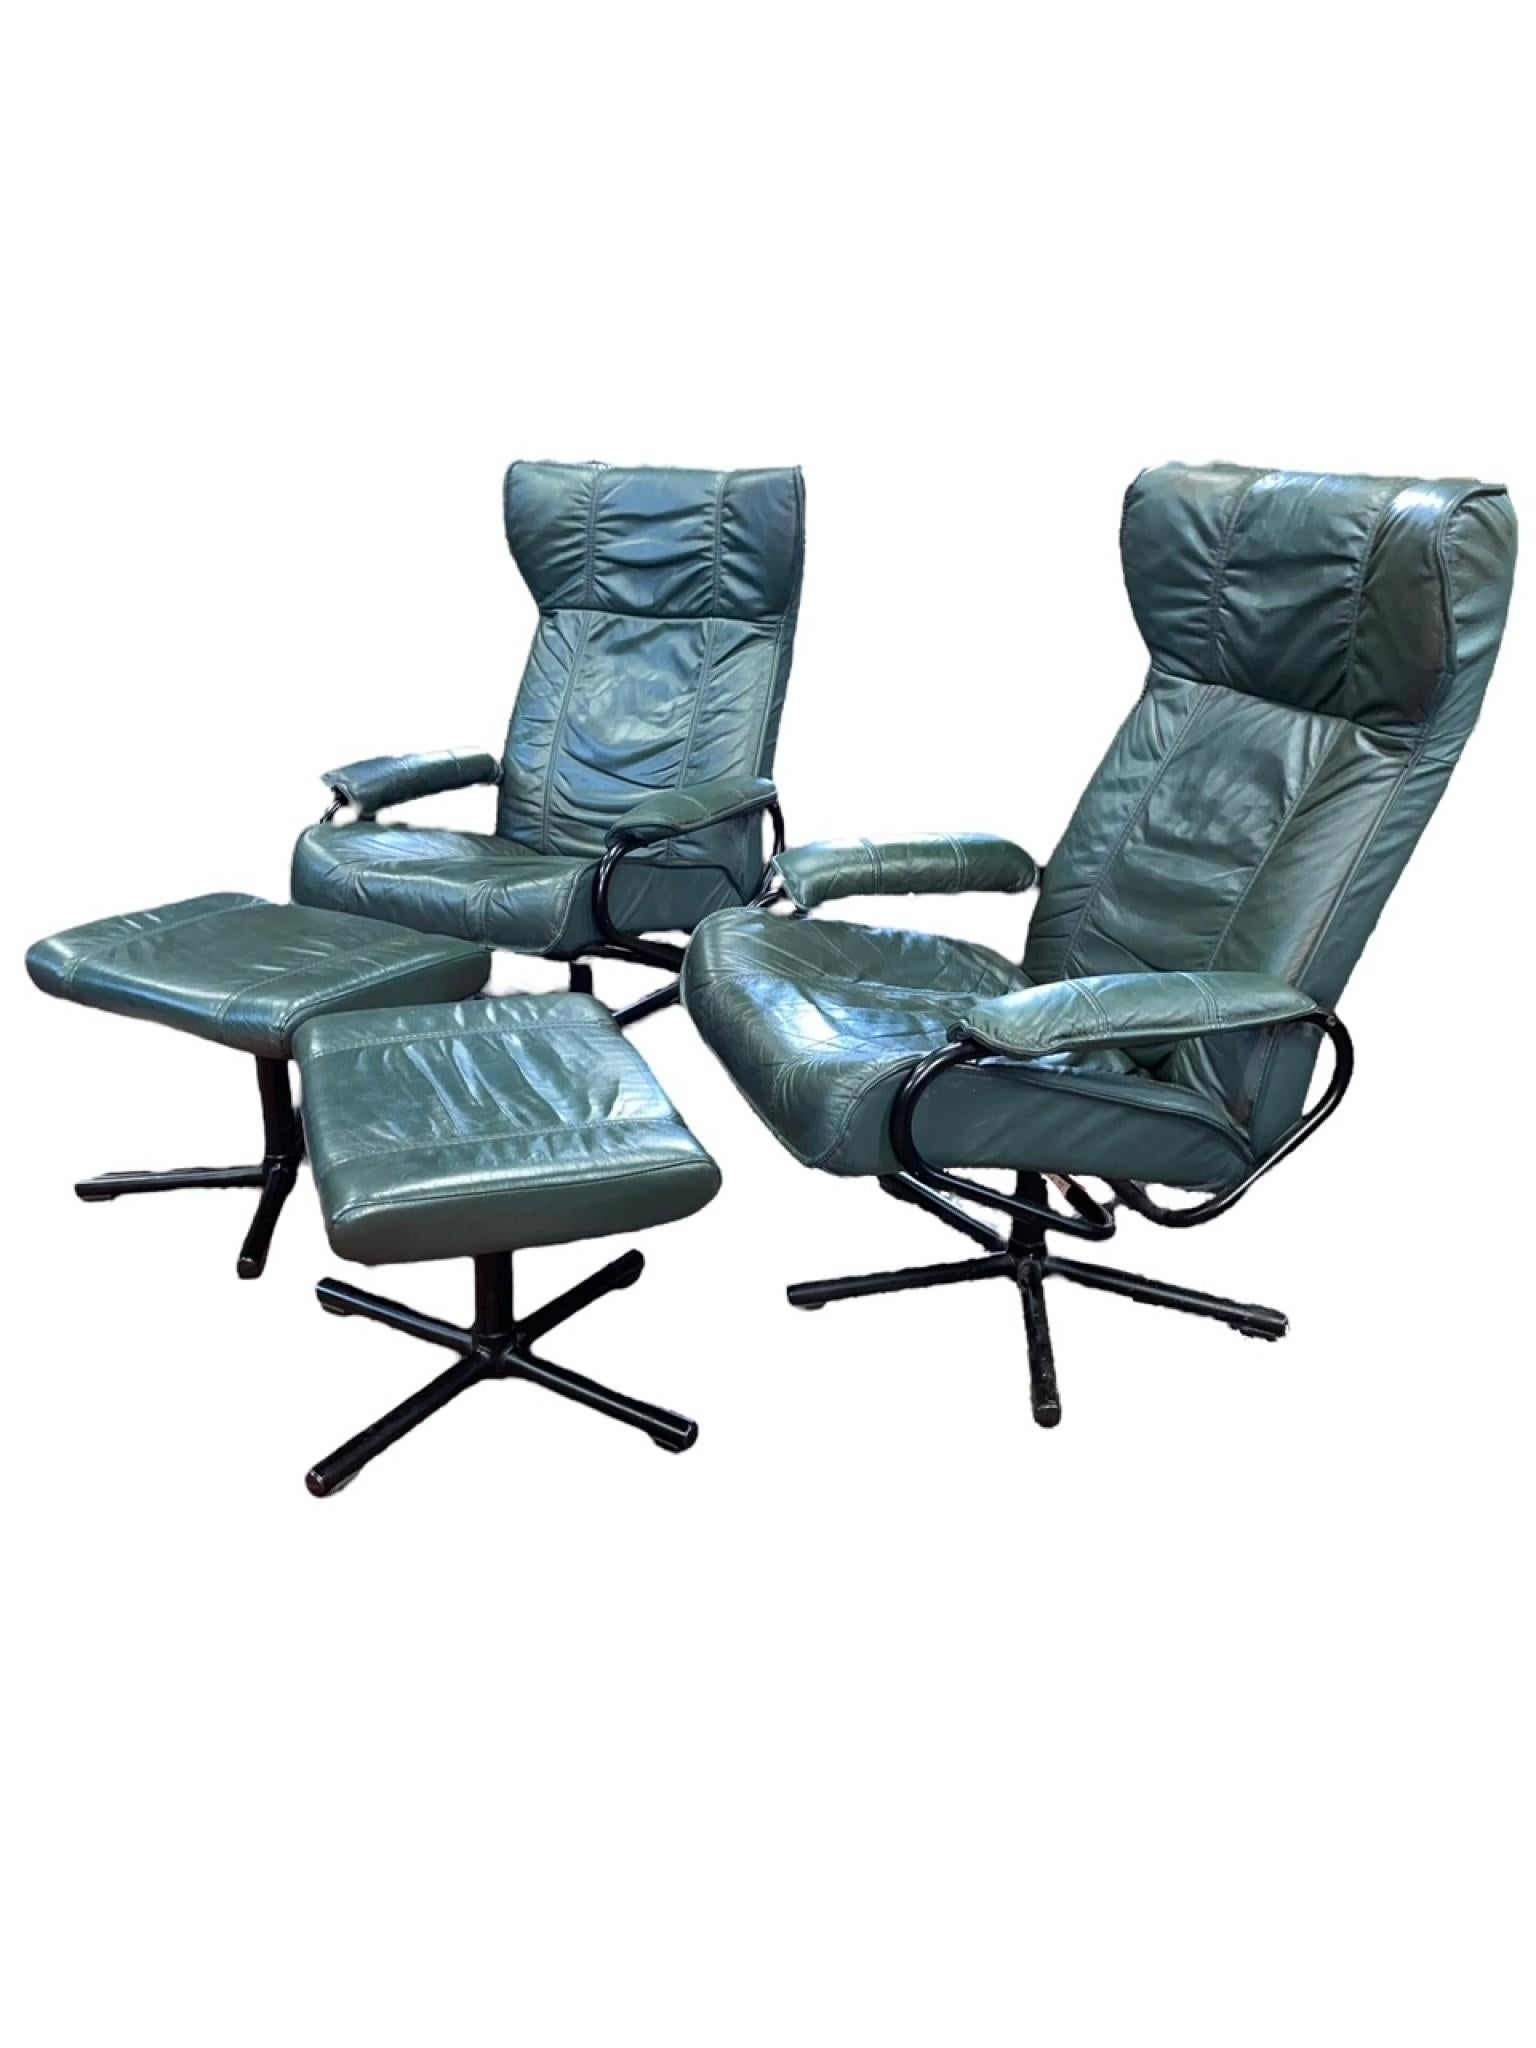 A Pair of Mid Century style Danish Kebe Green Leather Swivel Reclining Chairs with Matching Foot Stools.
Great interiors pair, very comfortable to sit in, especially with foot stools
Circa Date  1970
Offered in Excellent Condition. Ready for home